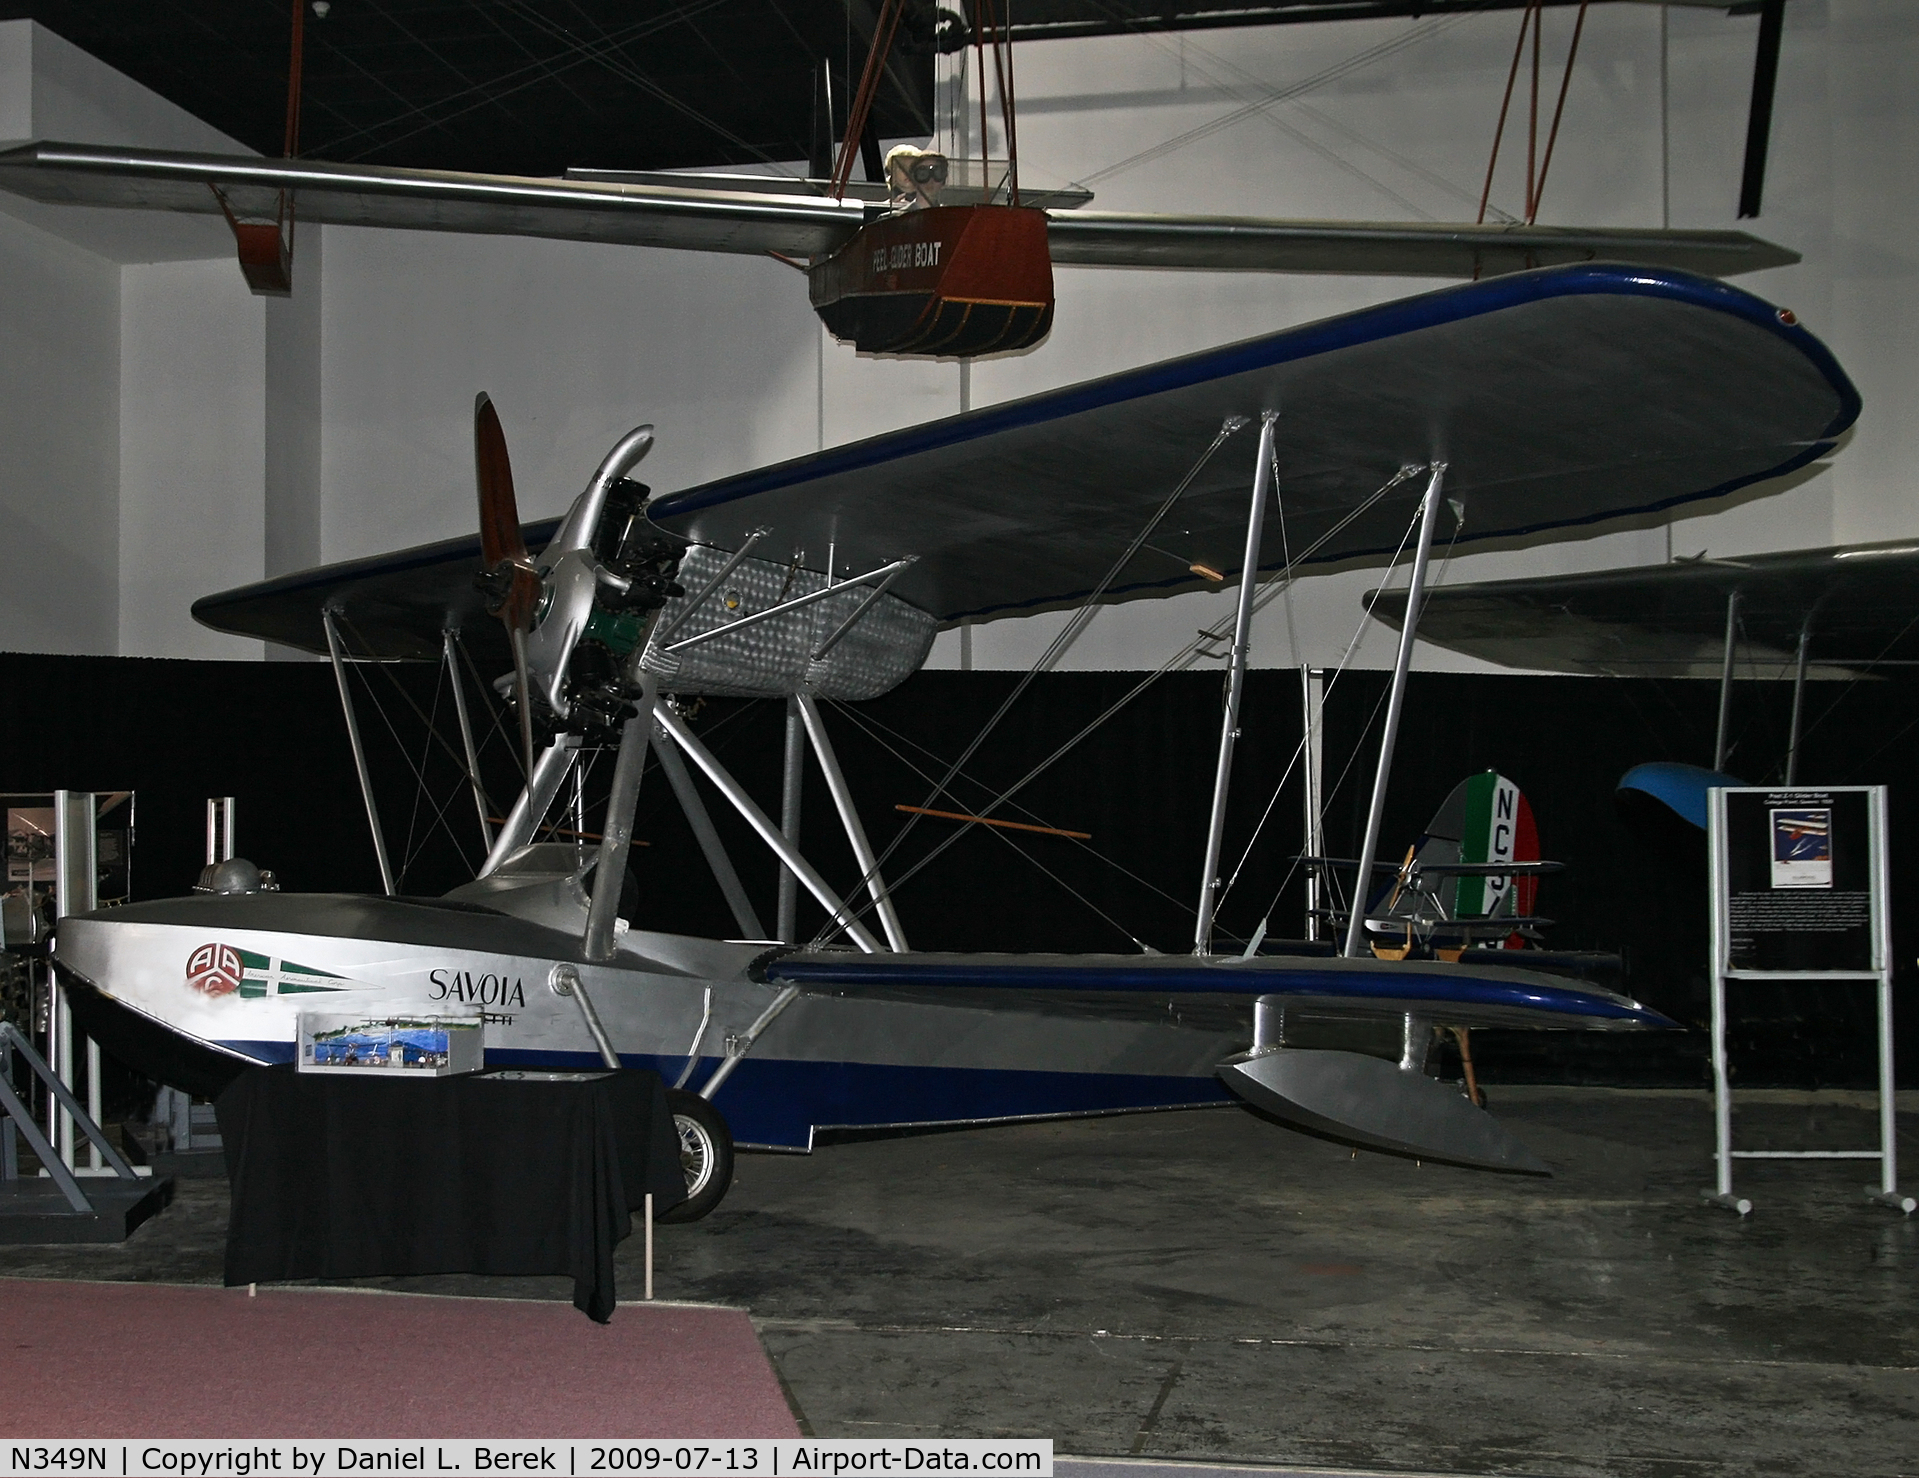 N349N, 1929 Savoia-Marchetti S-56 C/N 12, Golden Age amphibian, one of only two in existence, on loan to the Cradle of Aviation Museum.